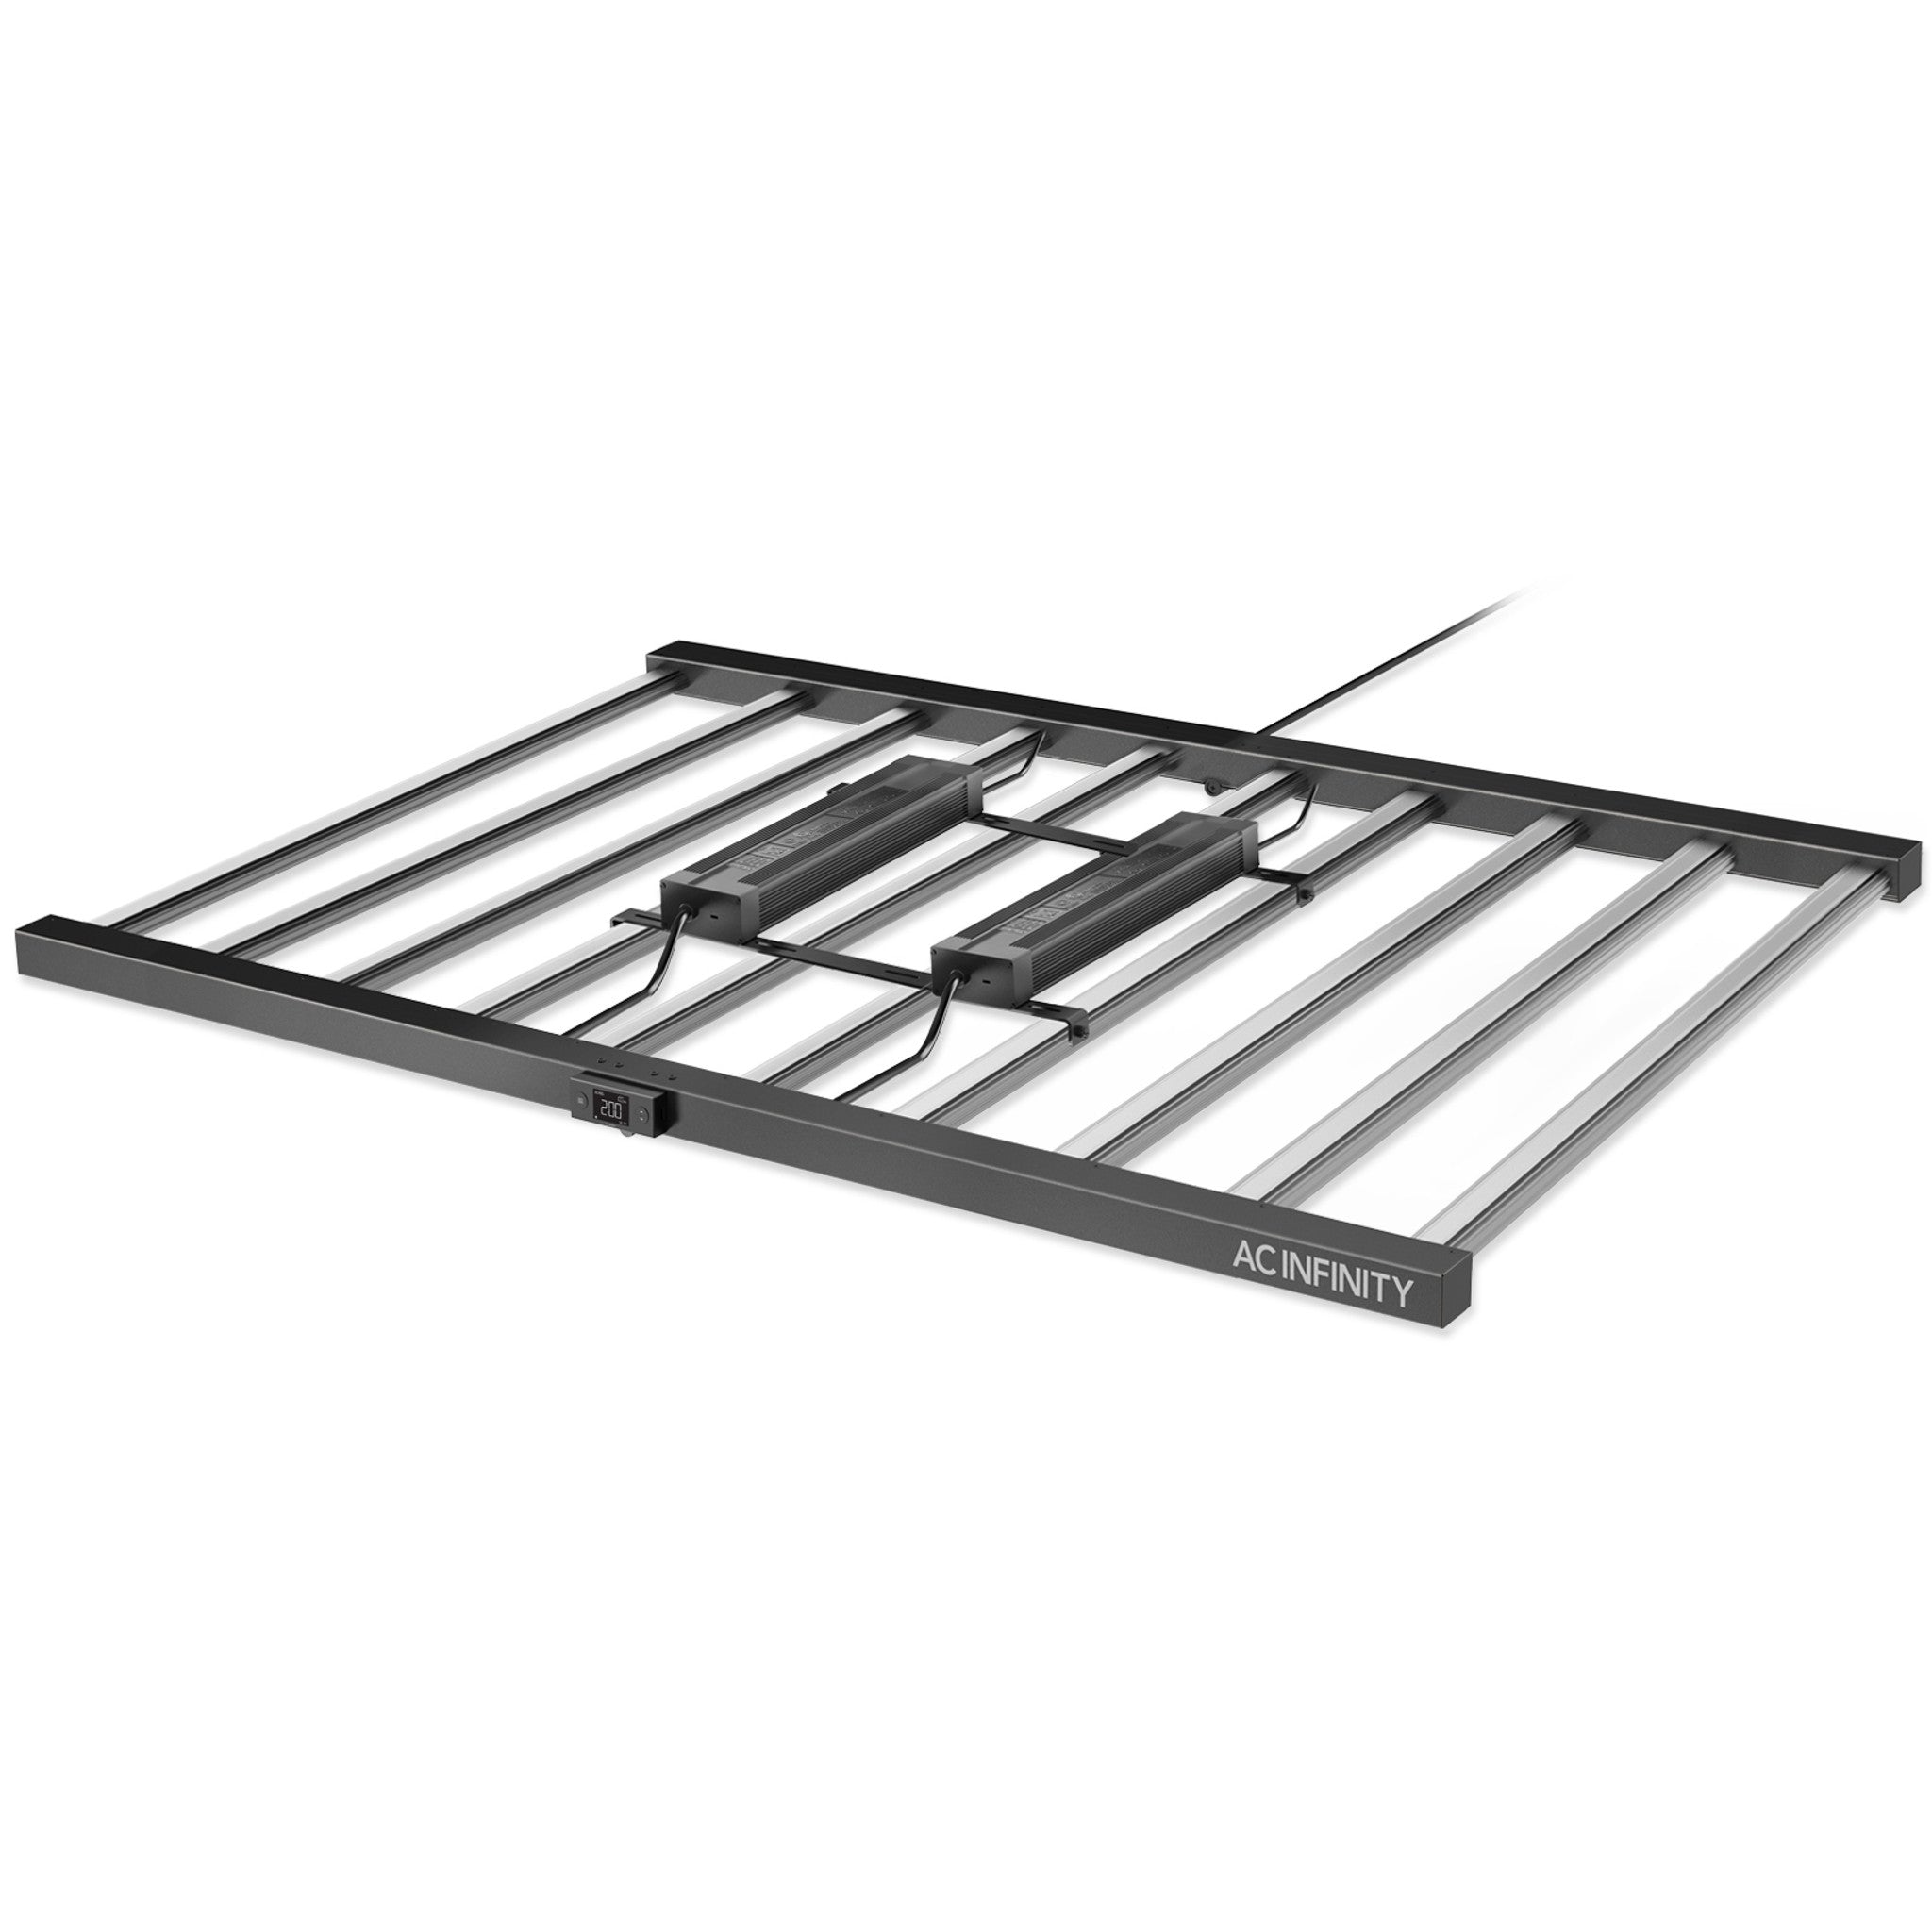 Product Image:IONFRAME EVO10, SAMSUNG LM301H EVO COMMERCIAL LED GROW LIGHT, 1000W, 5X5 FT.